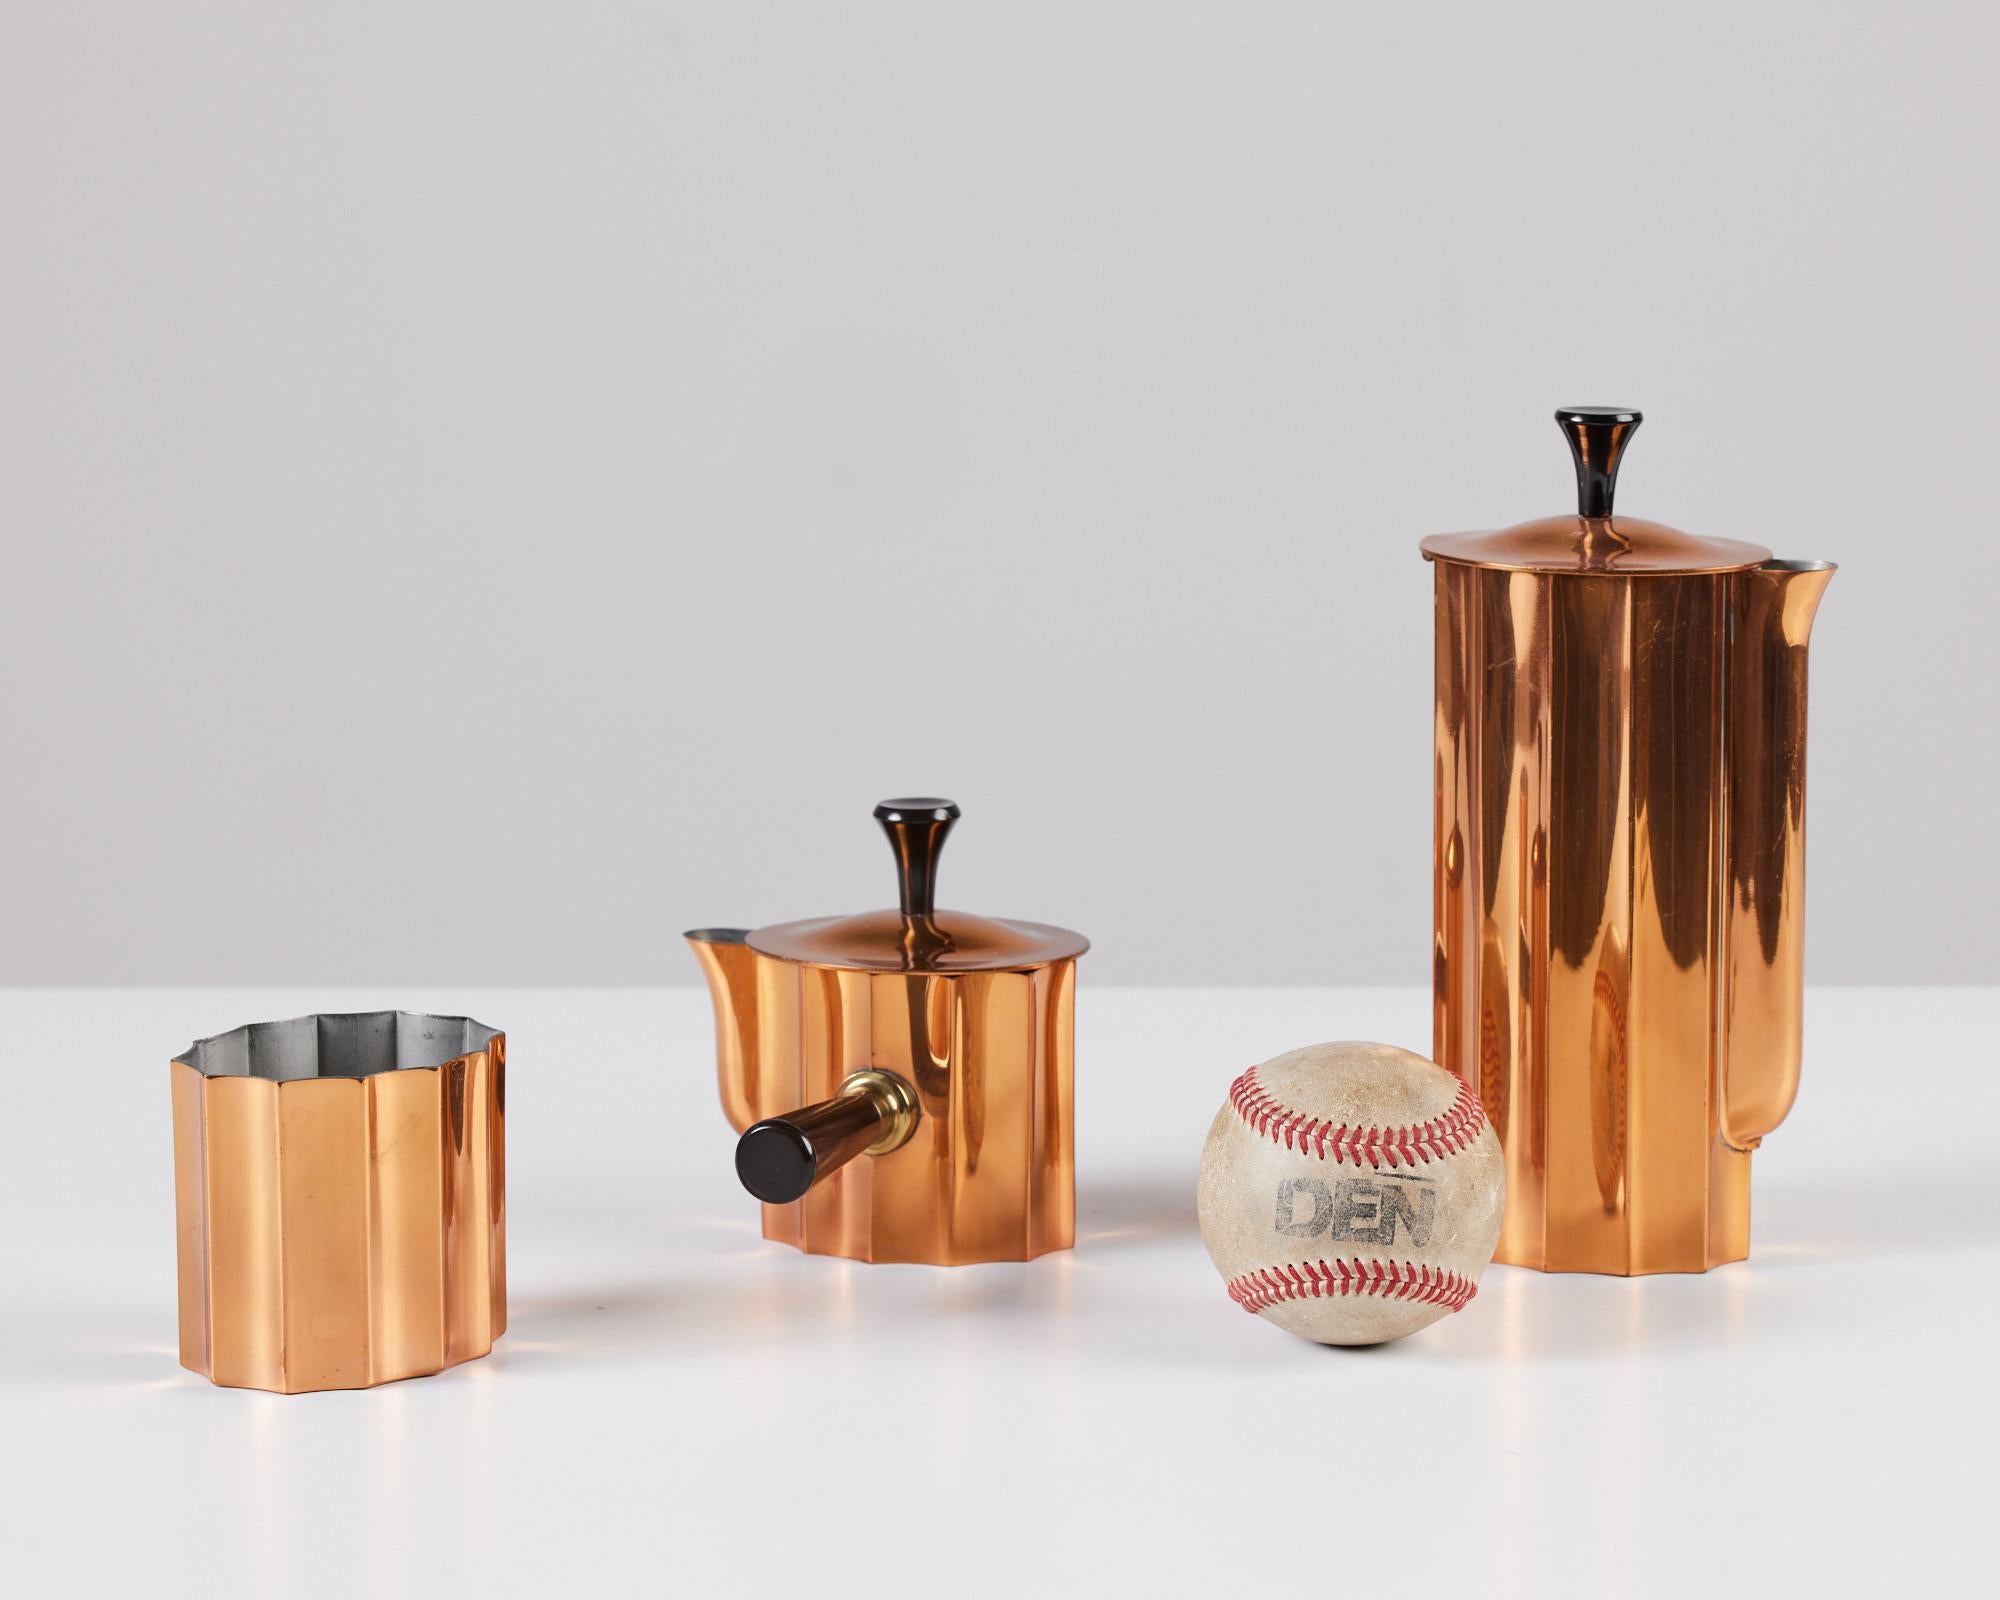 Three piece tea set by Walter von Nessen for Chase, USA, c.1930s. The set includes a tea pot, creamer and sugar bowl with Bakelite handles. The polished copper Art Deco set is impressed with [Chase USA] and feature the Chase Minotaur Archer logo on